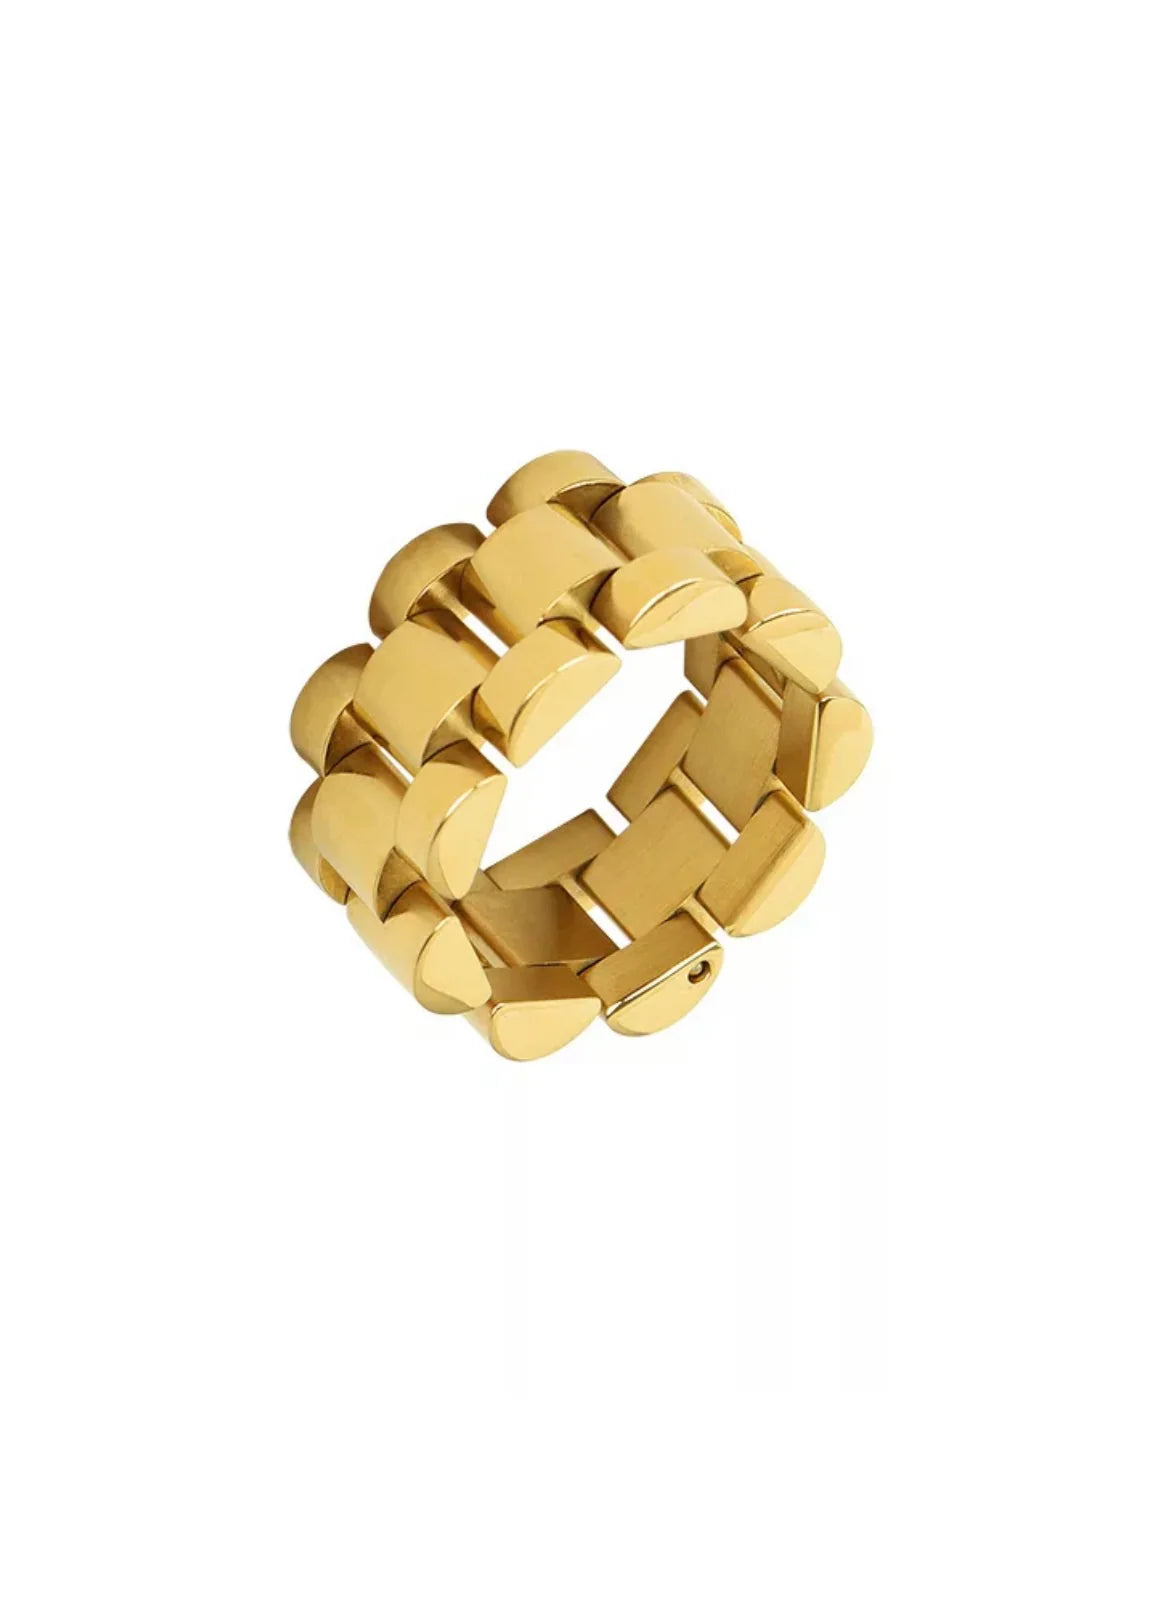 Thick Gold Loose Chain Ring - Water Resistant